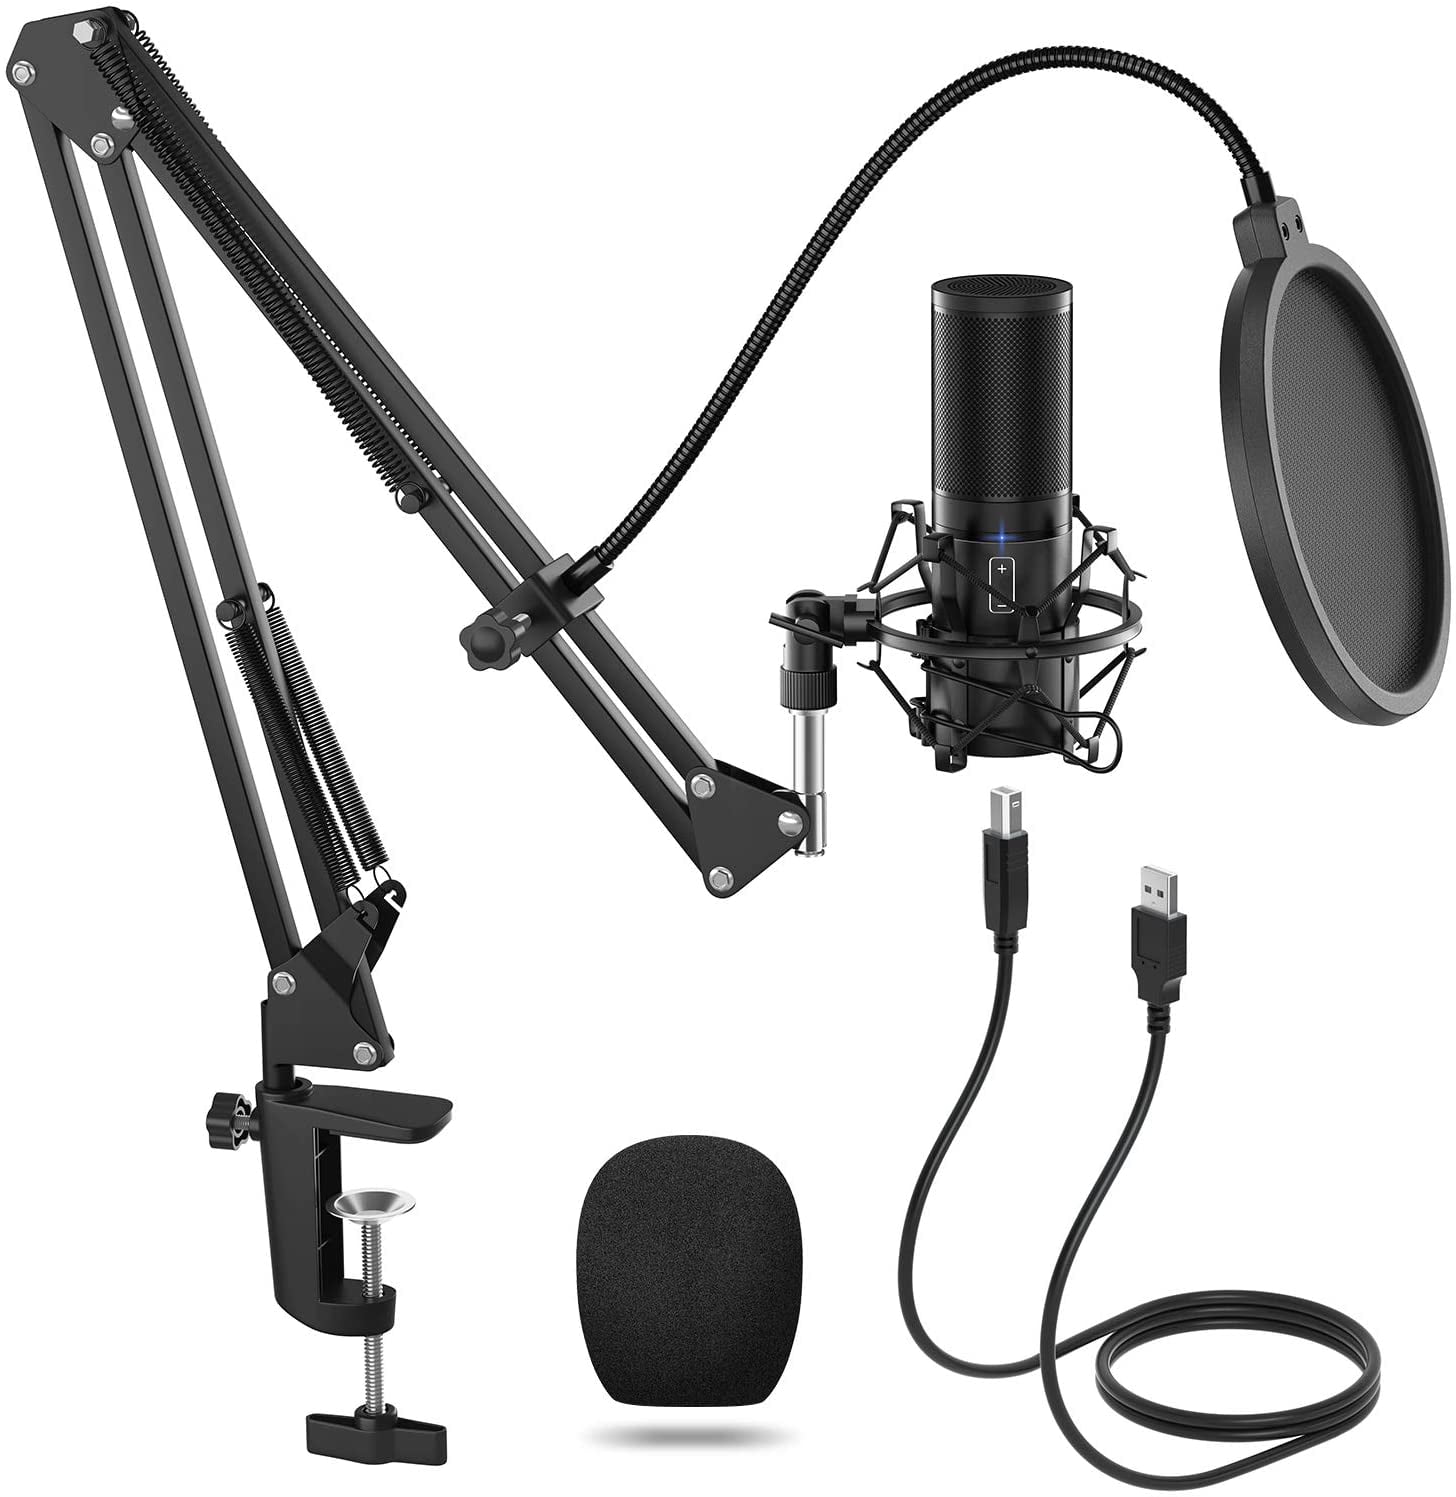 ELCM Microphone Kit USB Change Condenser Microphone Kit With Mic Pop Filter Suspension Boom Scissor Arm for Computer Gaming Streaming YouTube Tutorials Voiceover Tutorials Podcast